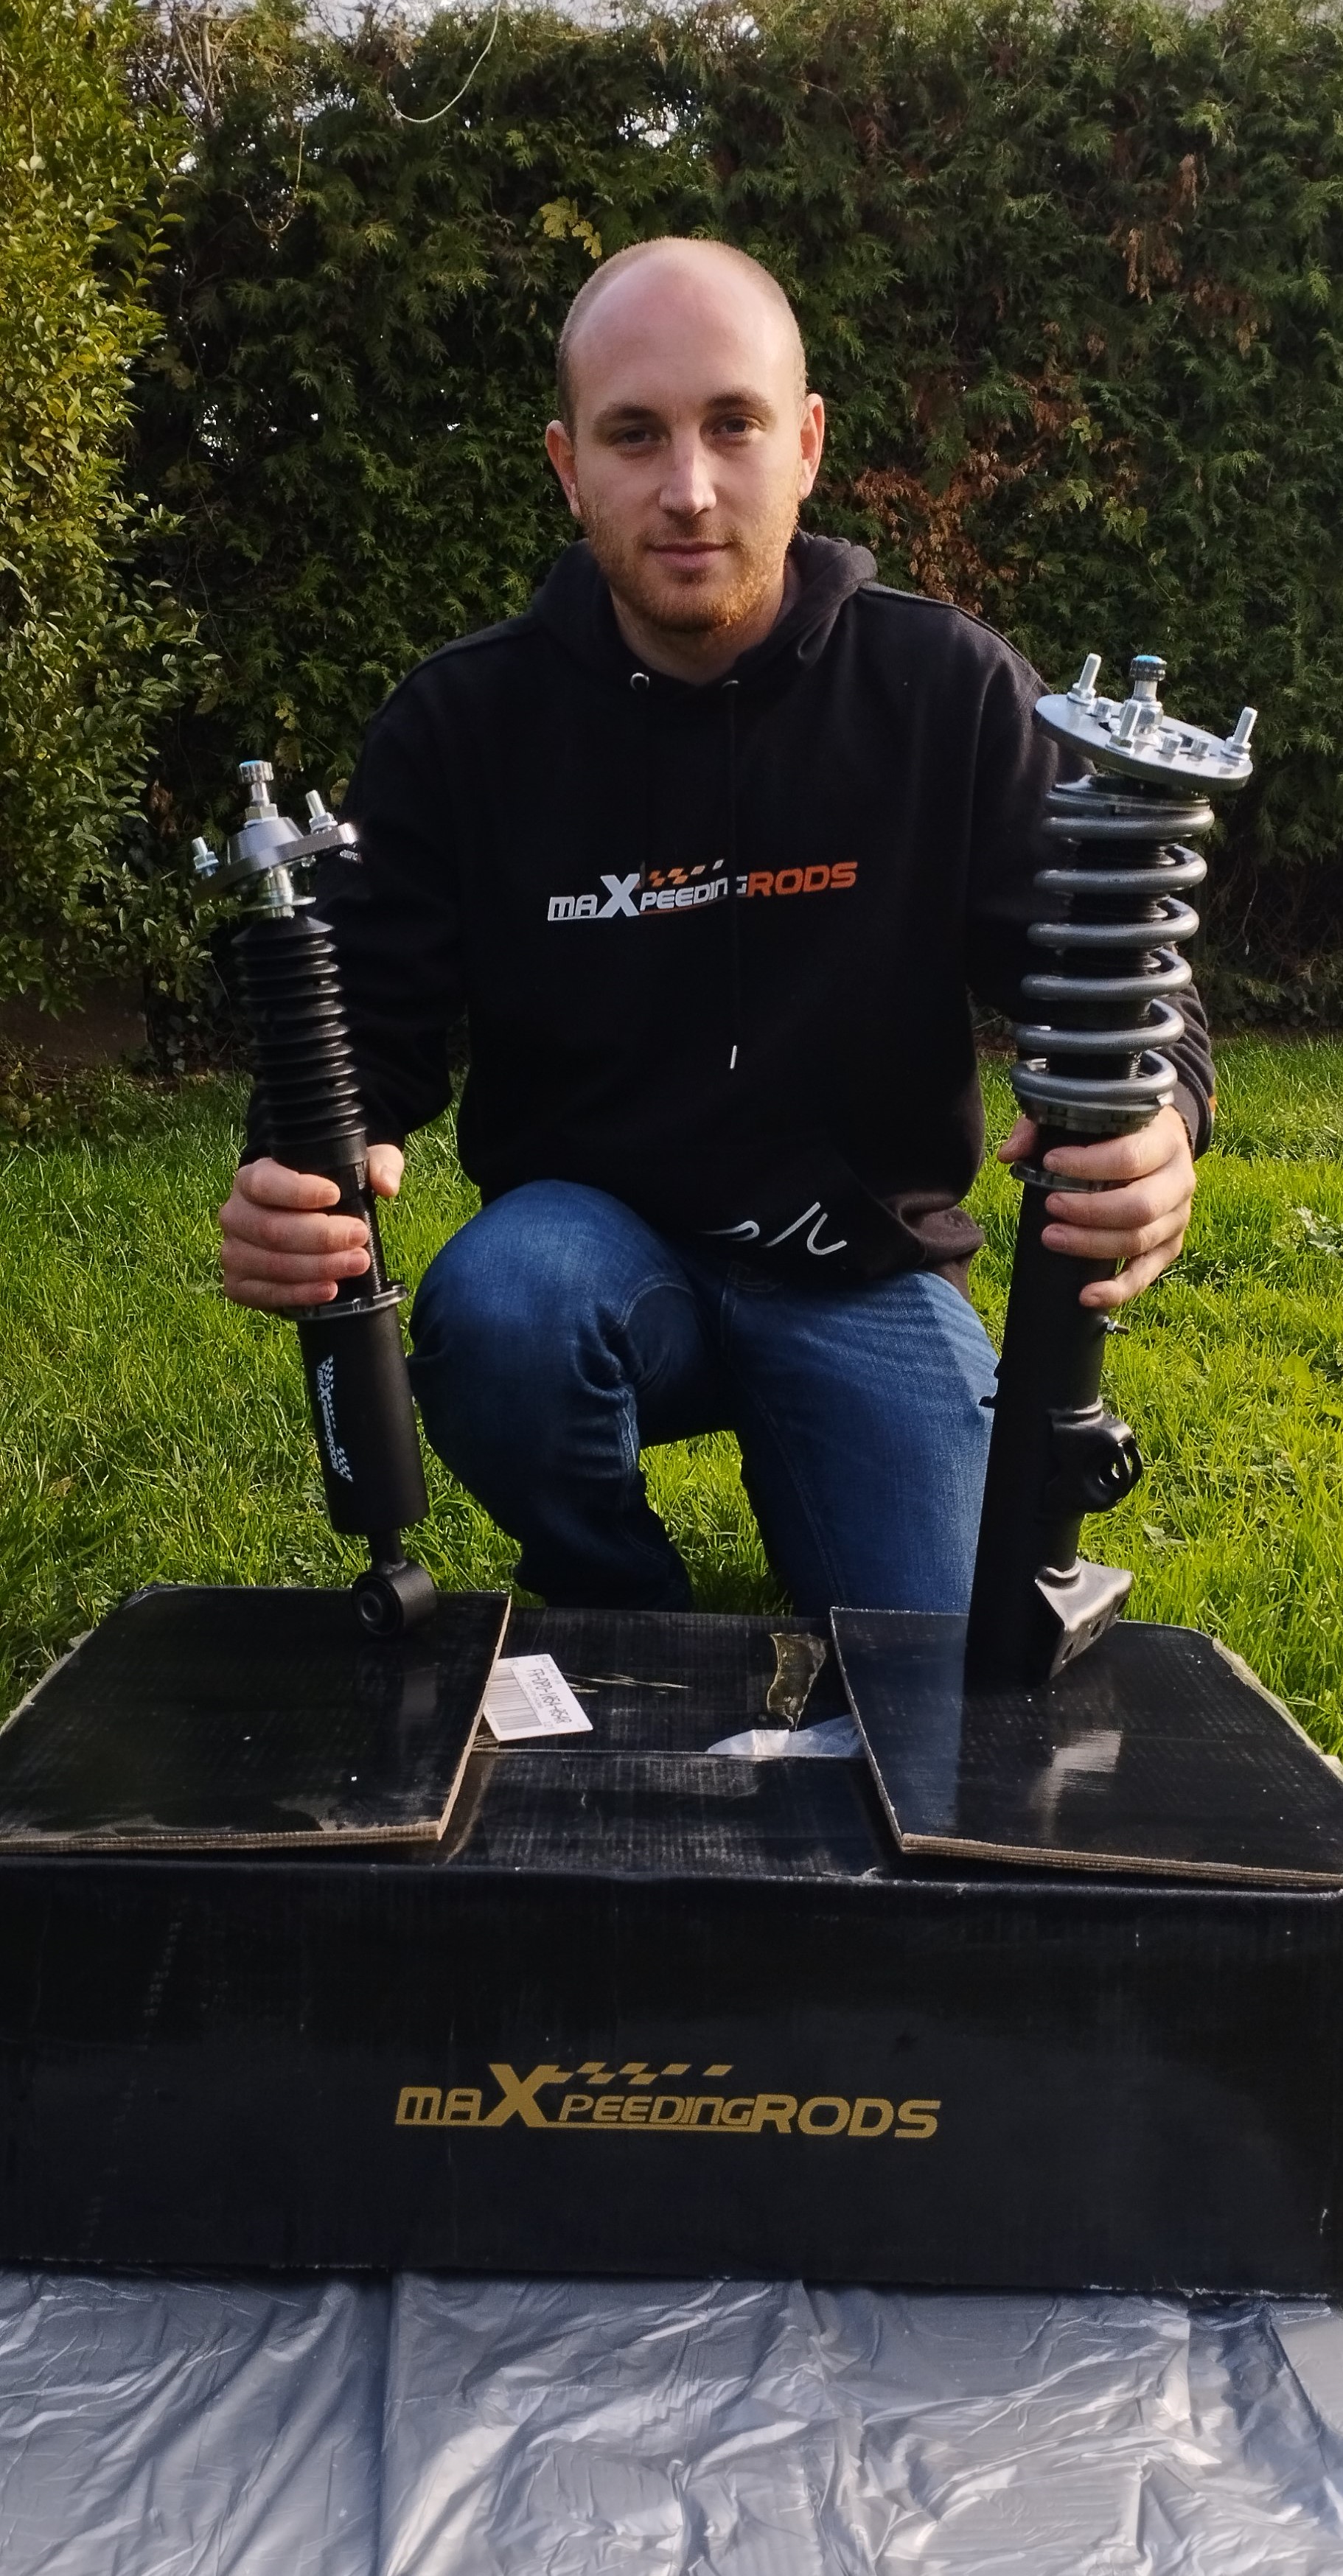 MaXpeedingRods Blog | An Automotive Blog from MaXpeedingRods - Are T7 Coilover Better Than Before? Read Racer’s Review